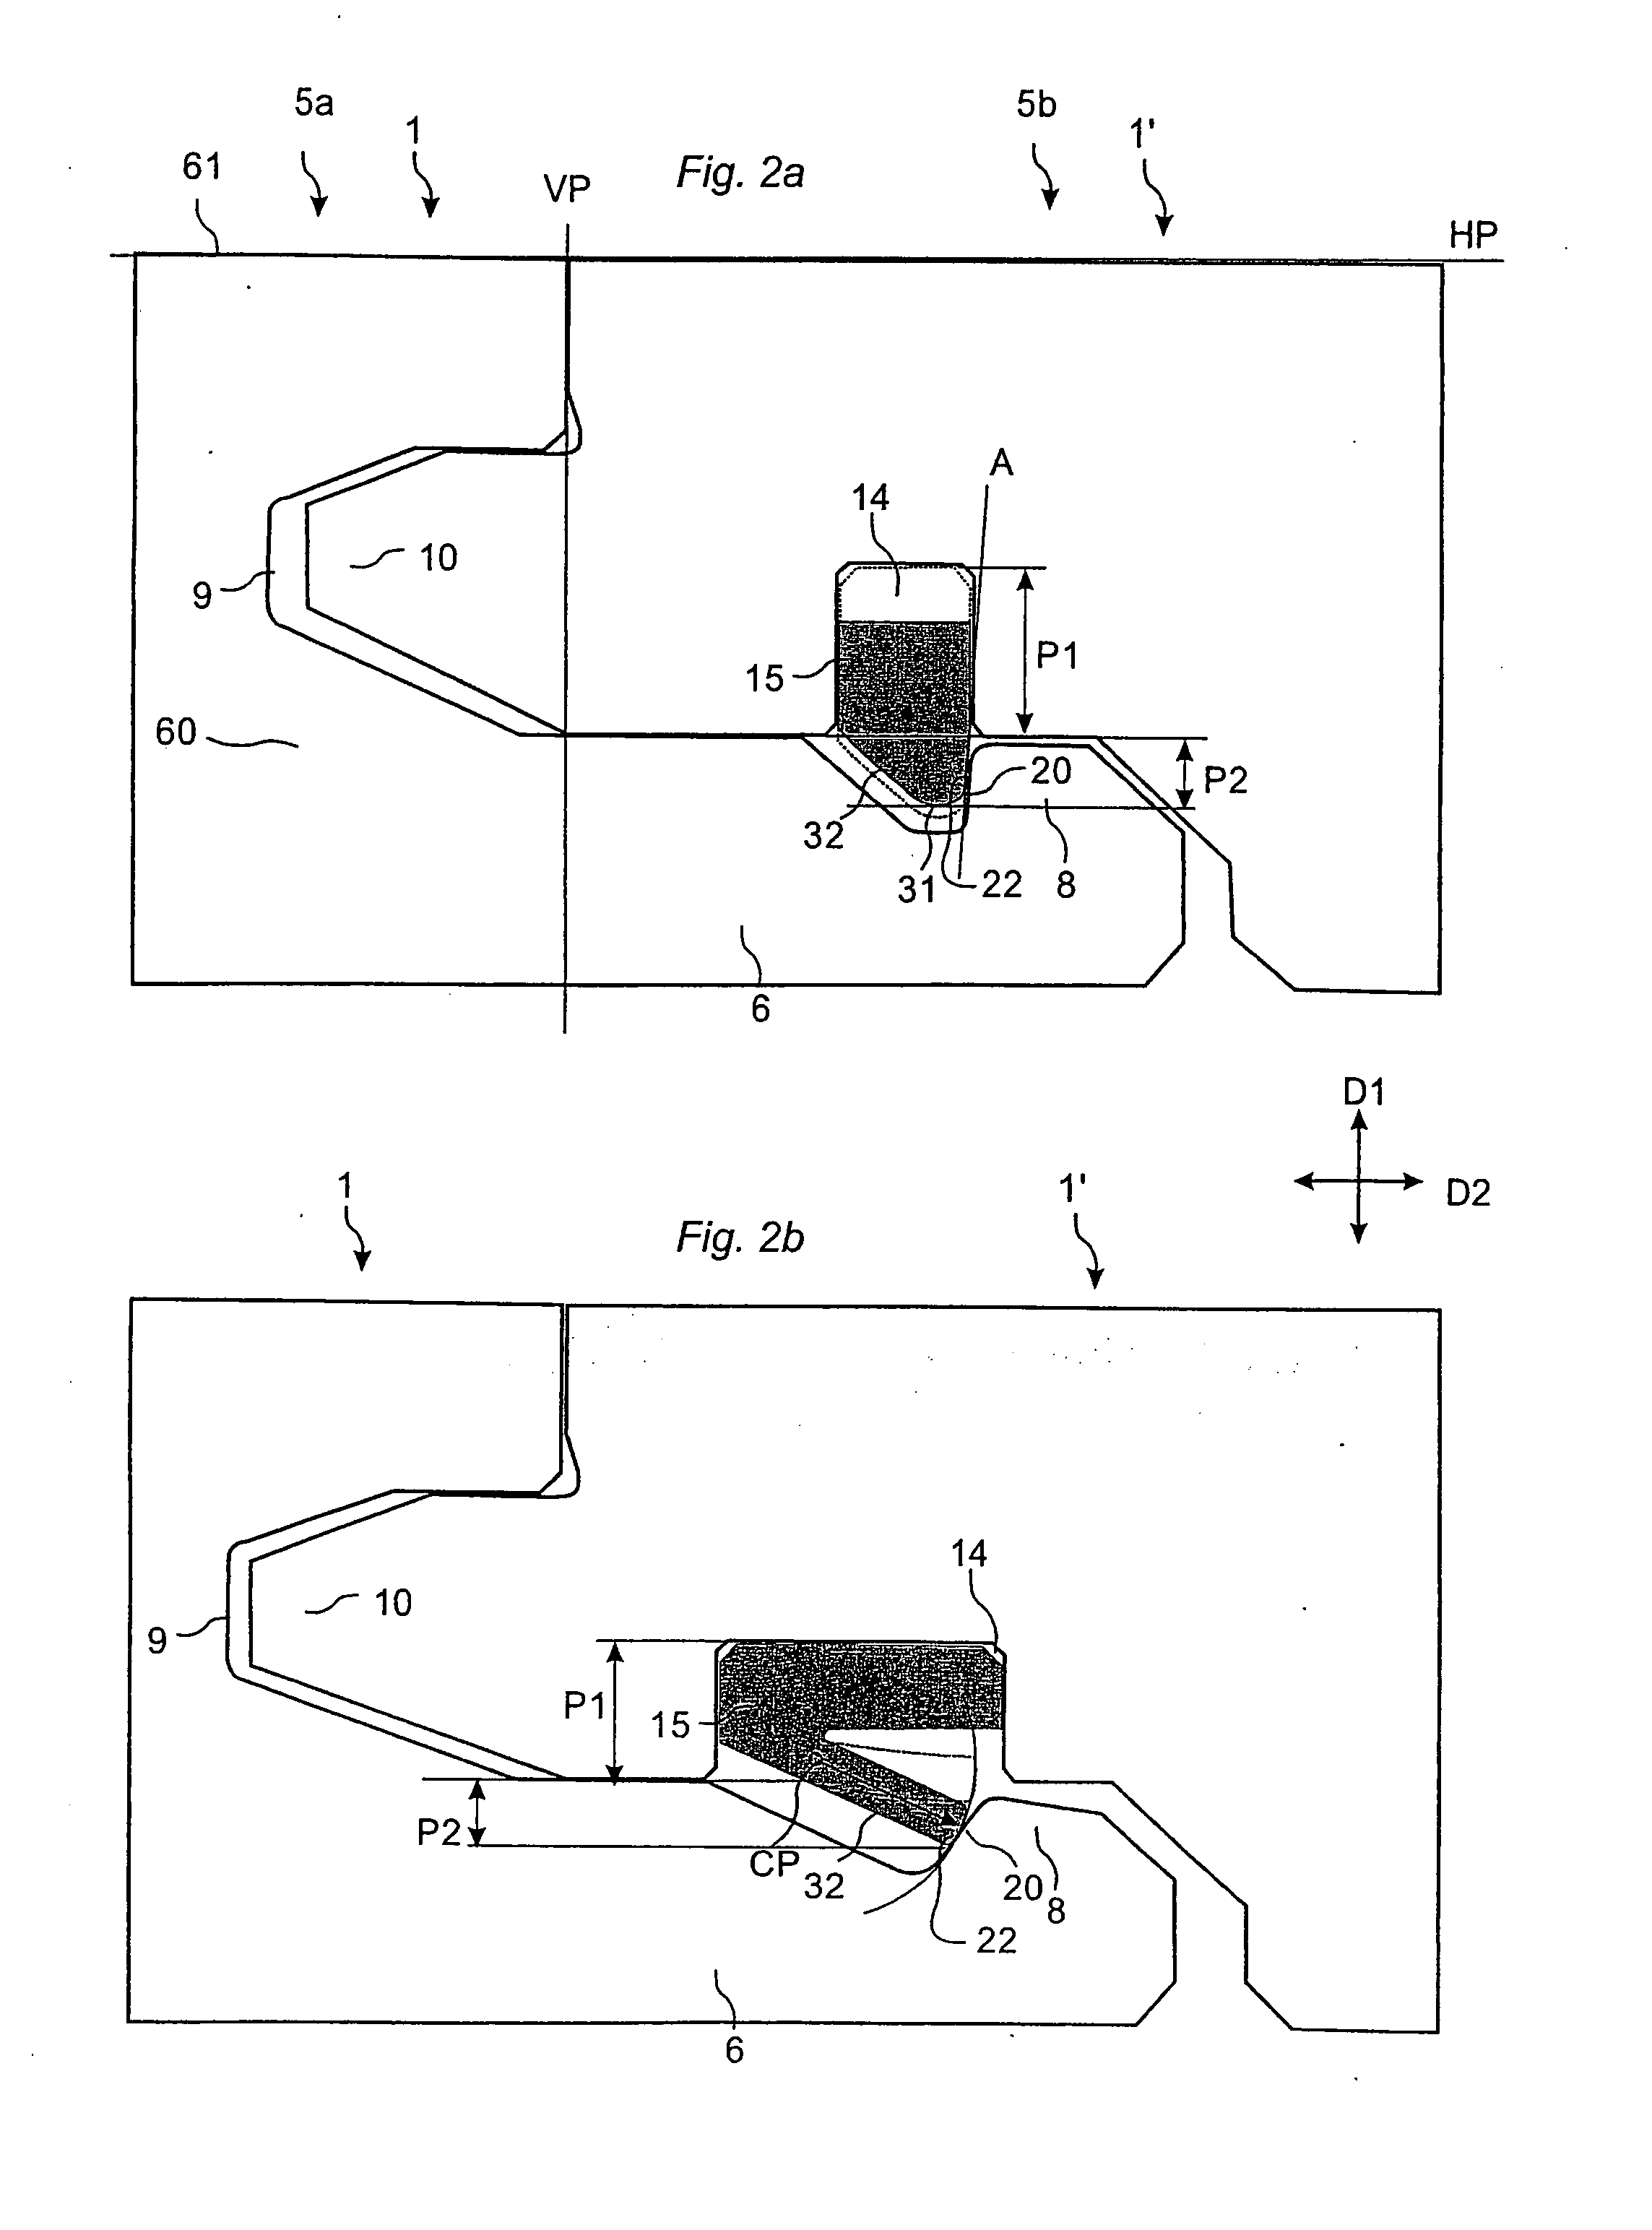 Mechanical locking system for panels and method of installing same